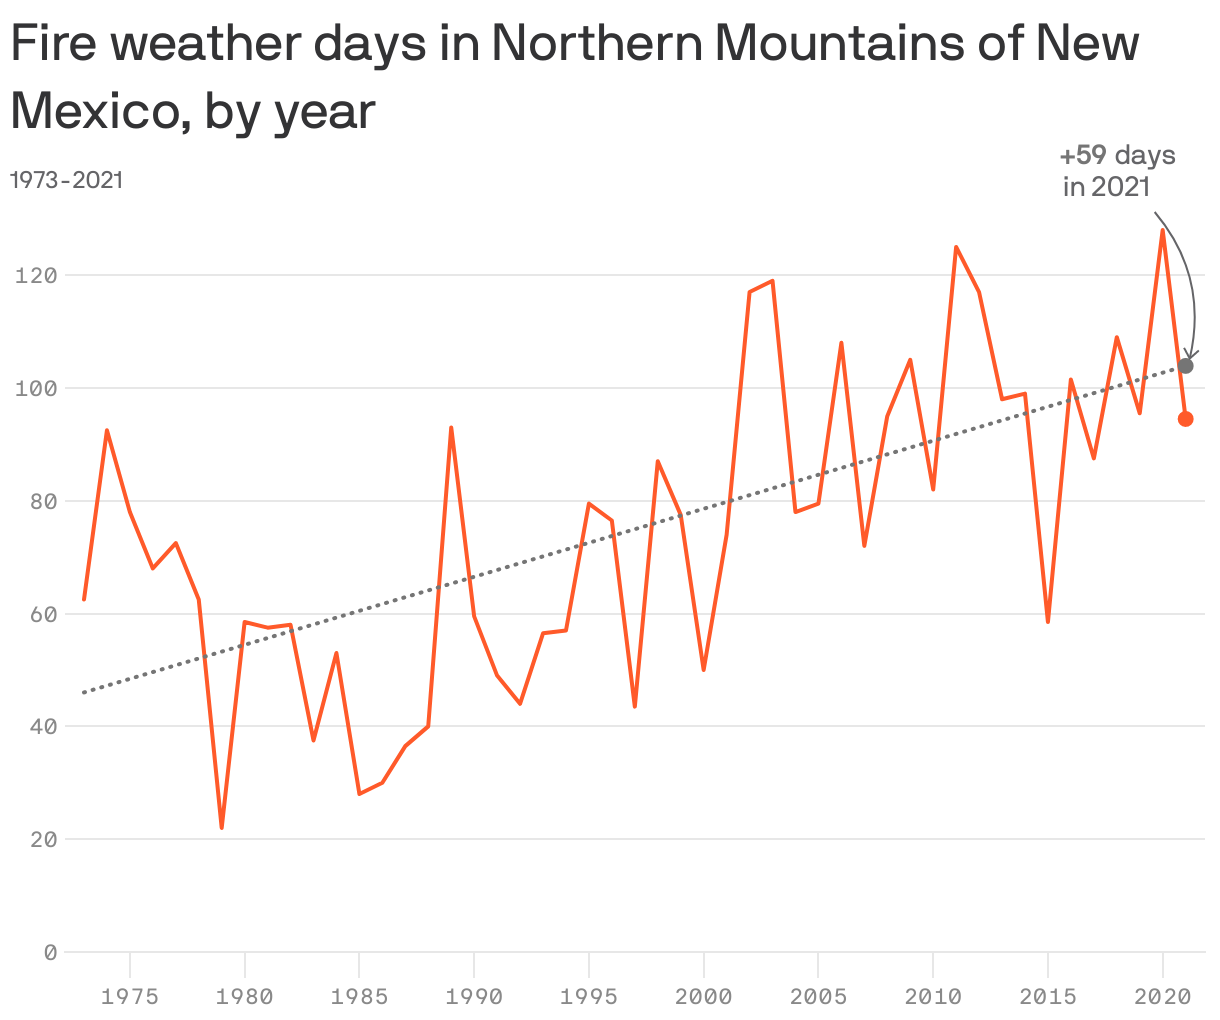 Fire weather days in Northern Mountains of New Mexico, by year